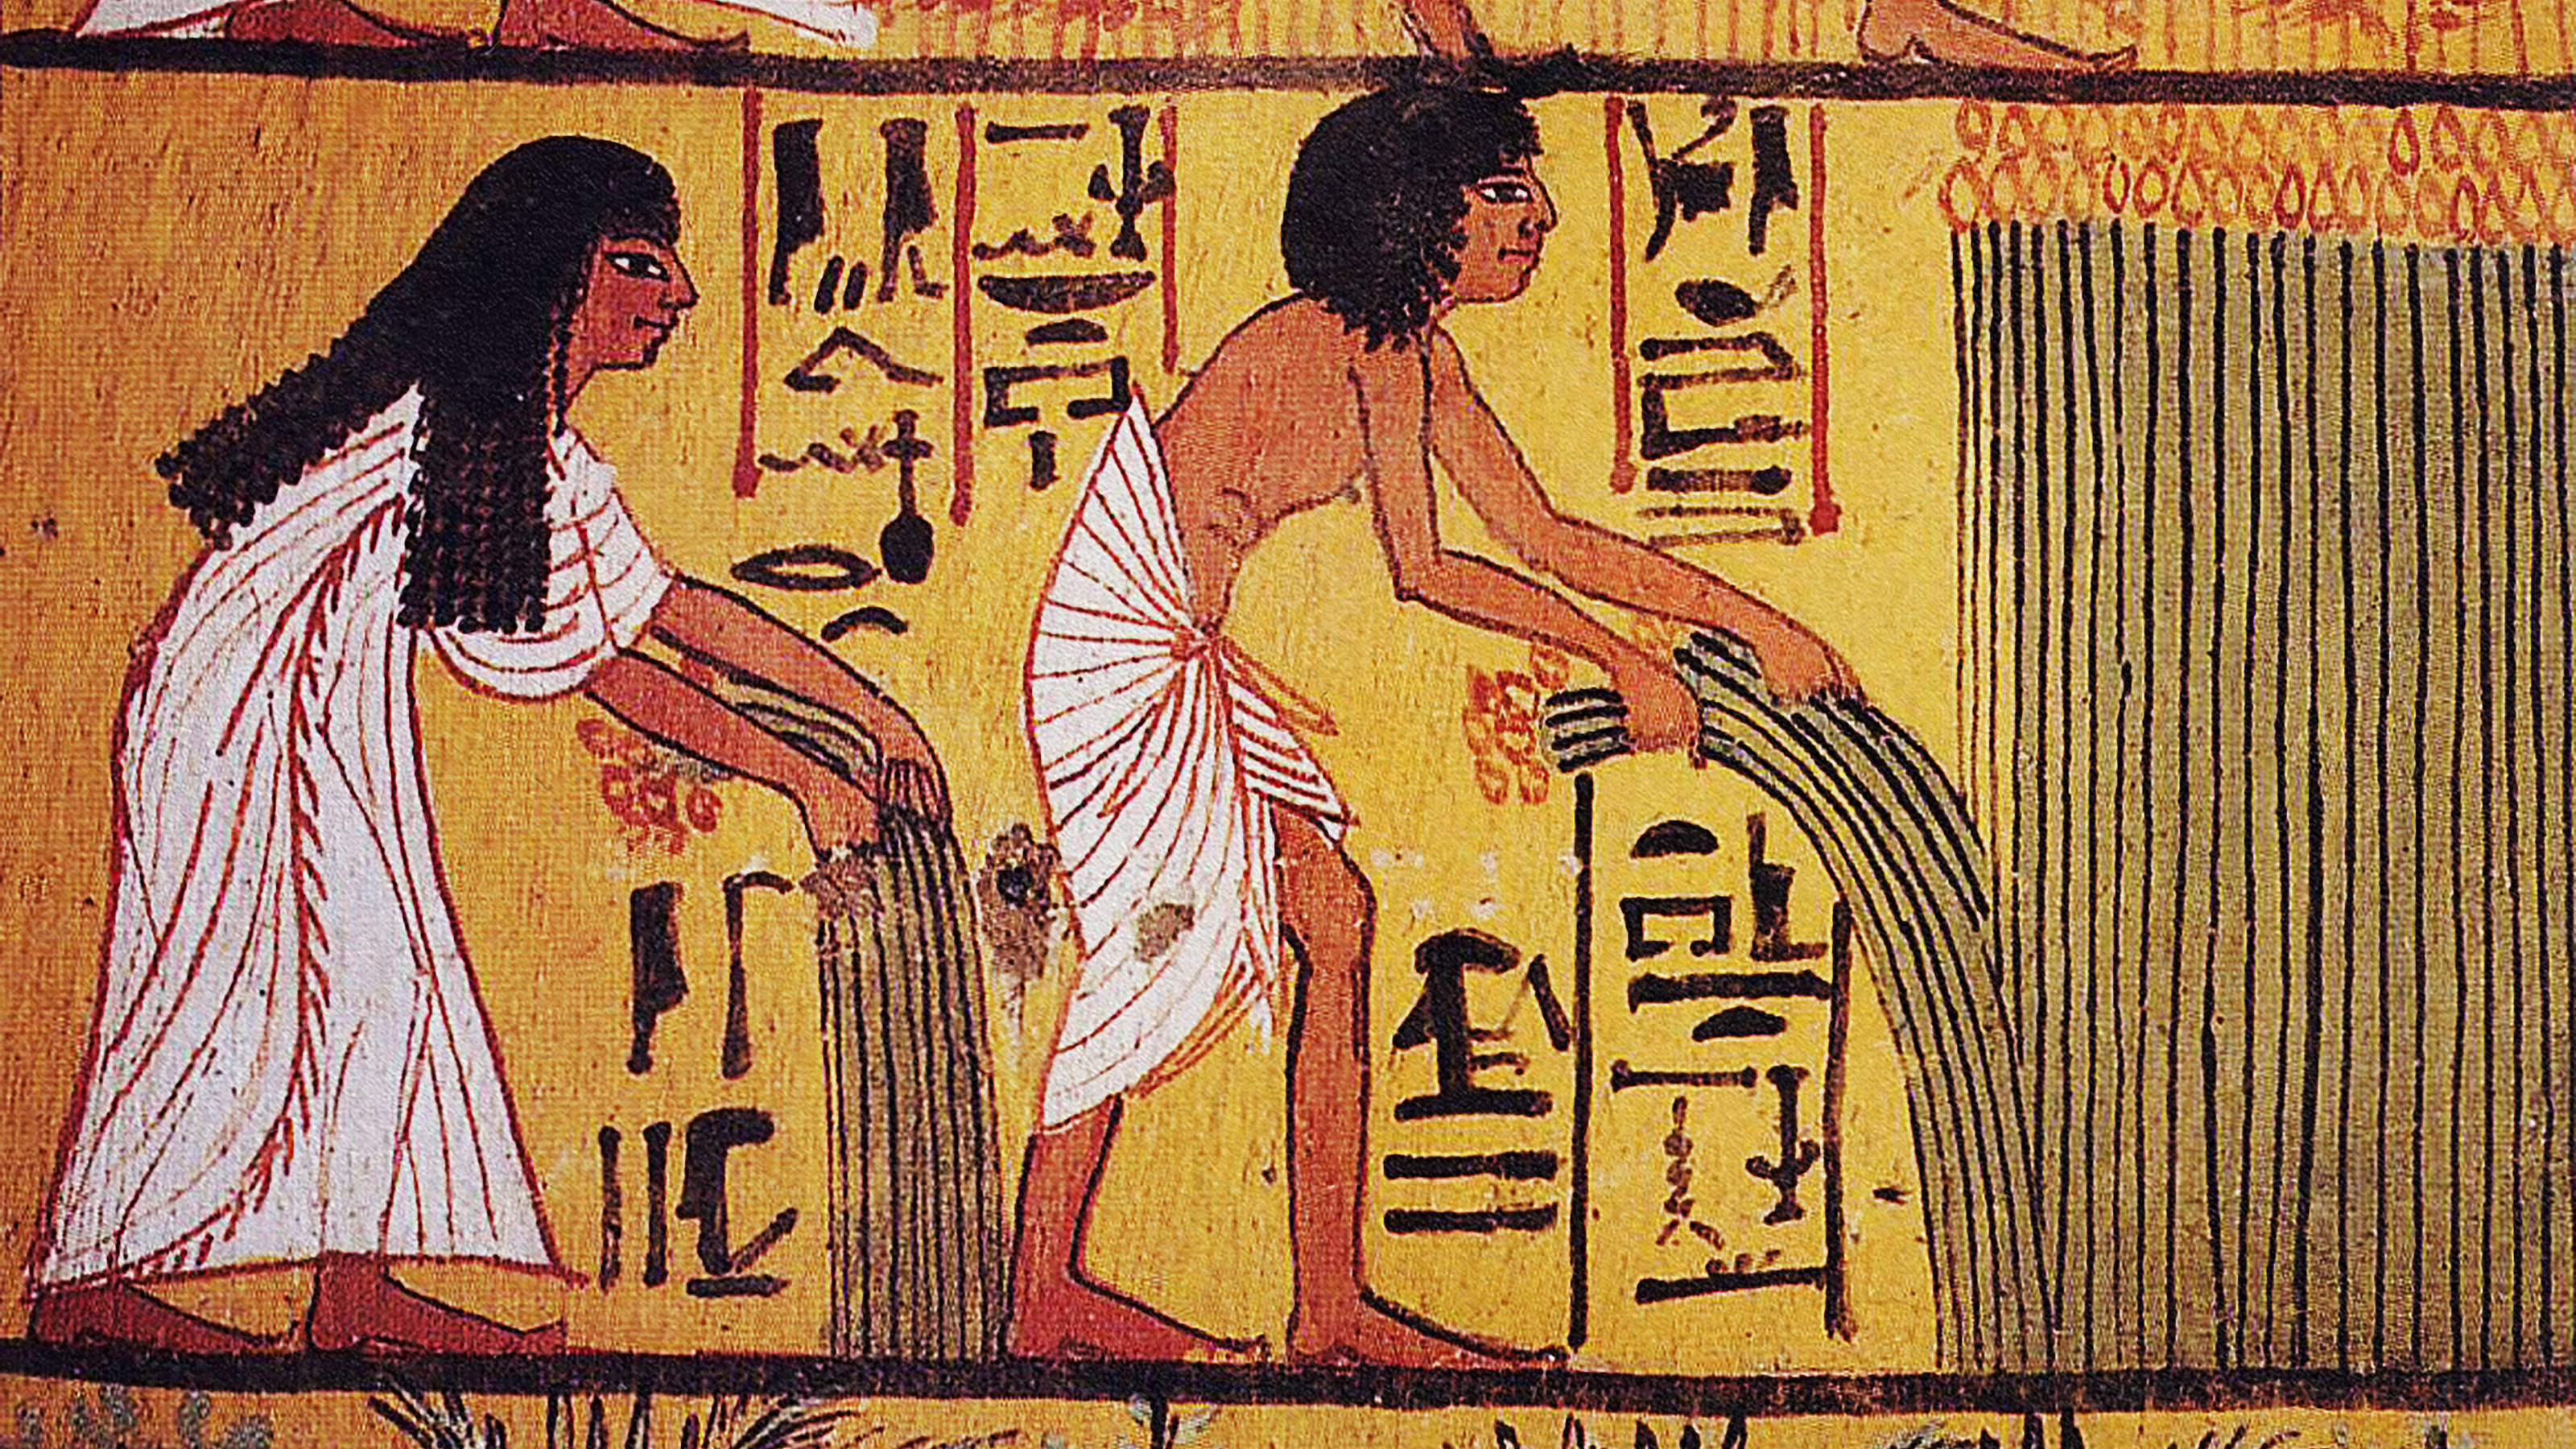 An Egyptian painting depicting life after death through a depiction of a woman and a man.